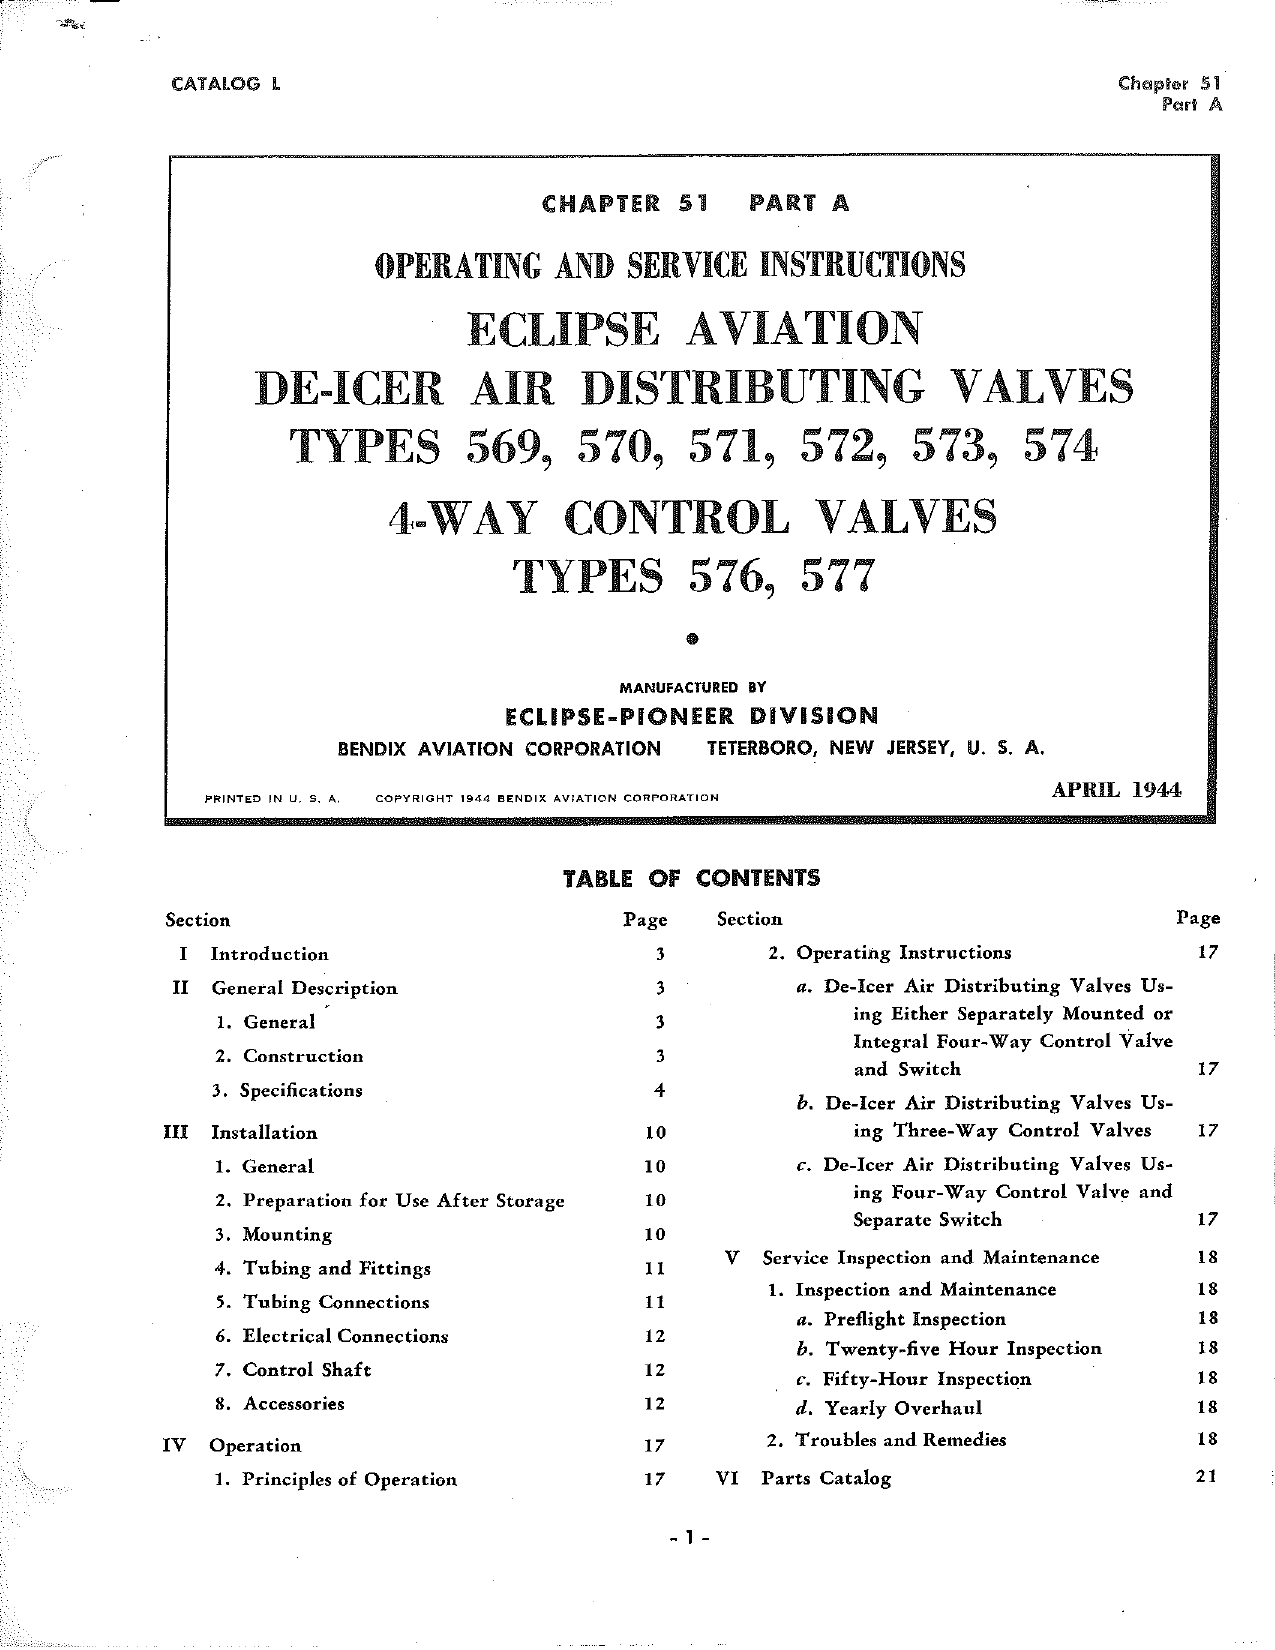 Sample page 1 from AirCorps Library document: Operating and Service Instructions for De-Icer Air Distributing Valves and 4-Way Control Valves